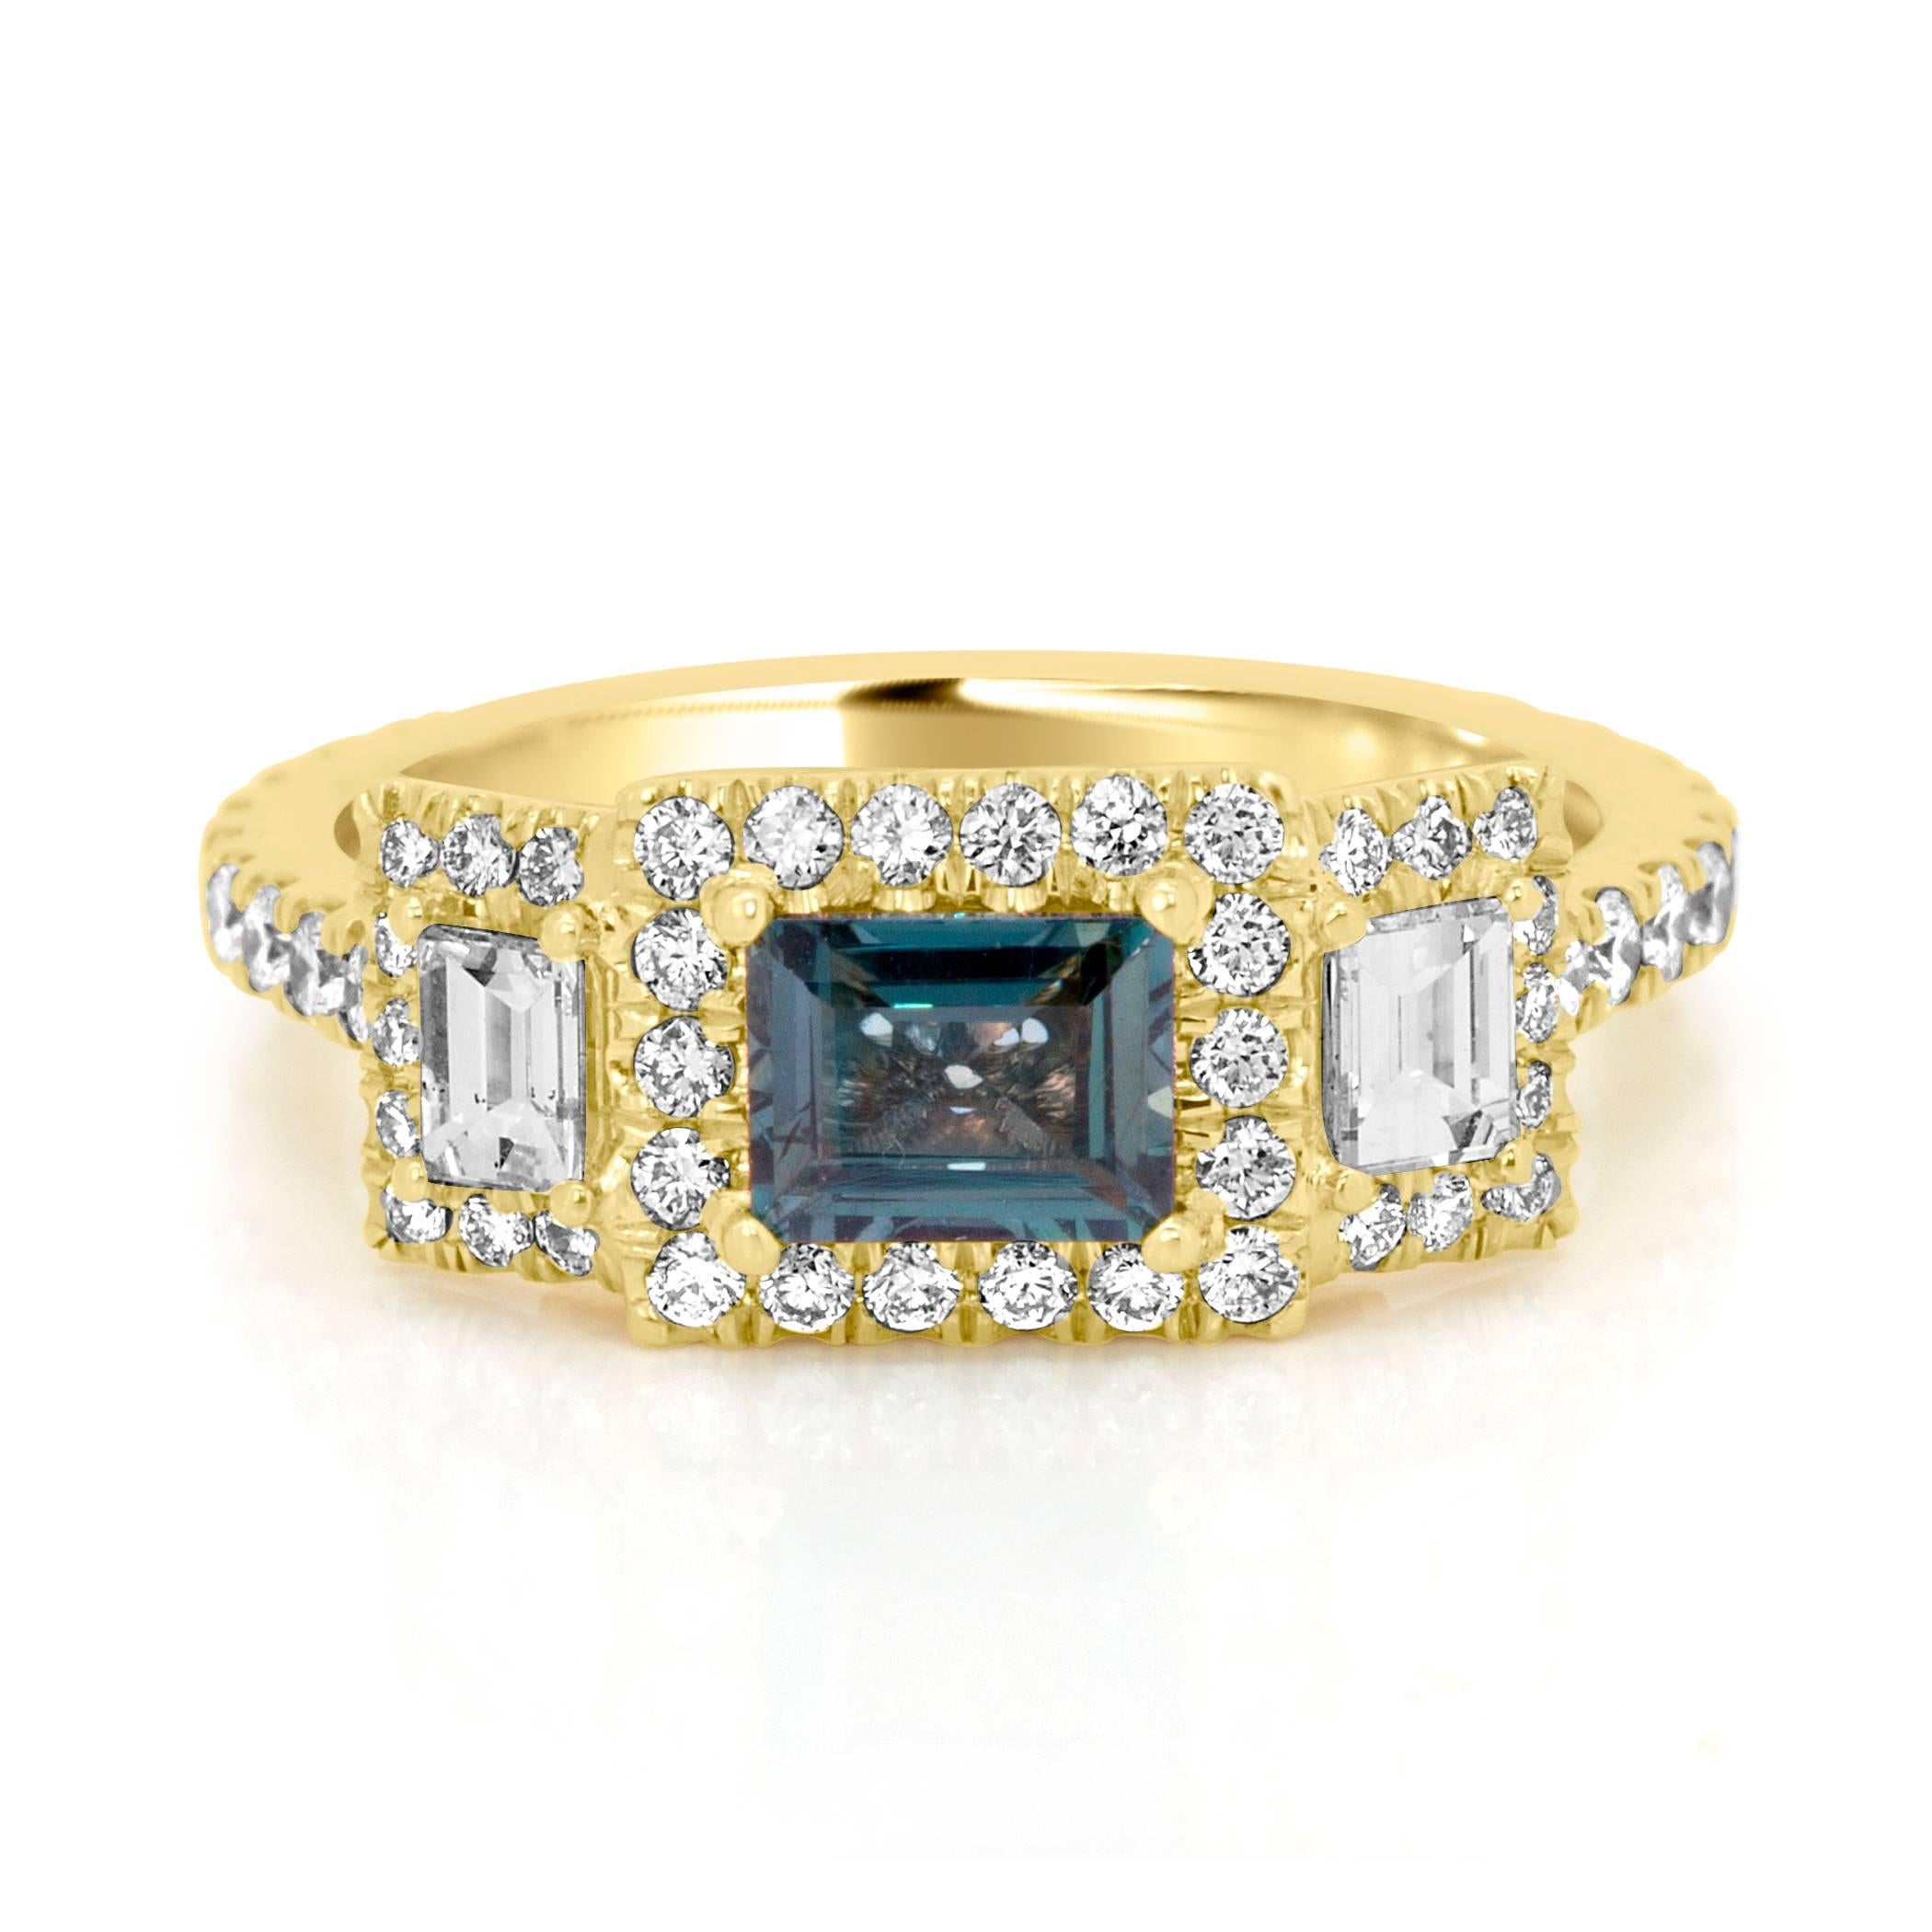 0.66 Carat Rectangular Alexandrite Good Color Change Encircled in a Halo of White round Diamond 0.70 Carat Flanked by 2 Baguettes on side in 18K Yellow Gold Ring. MADE IN USA.  